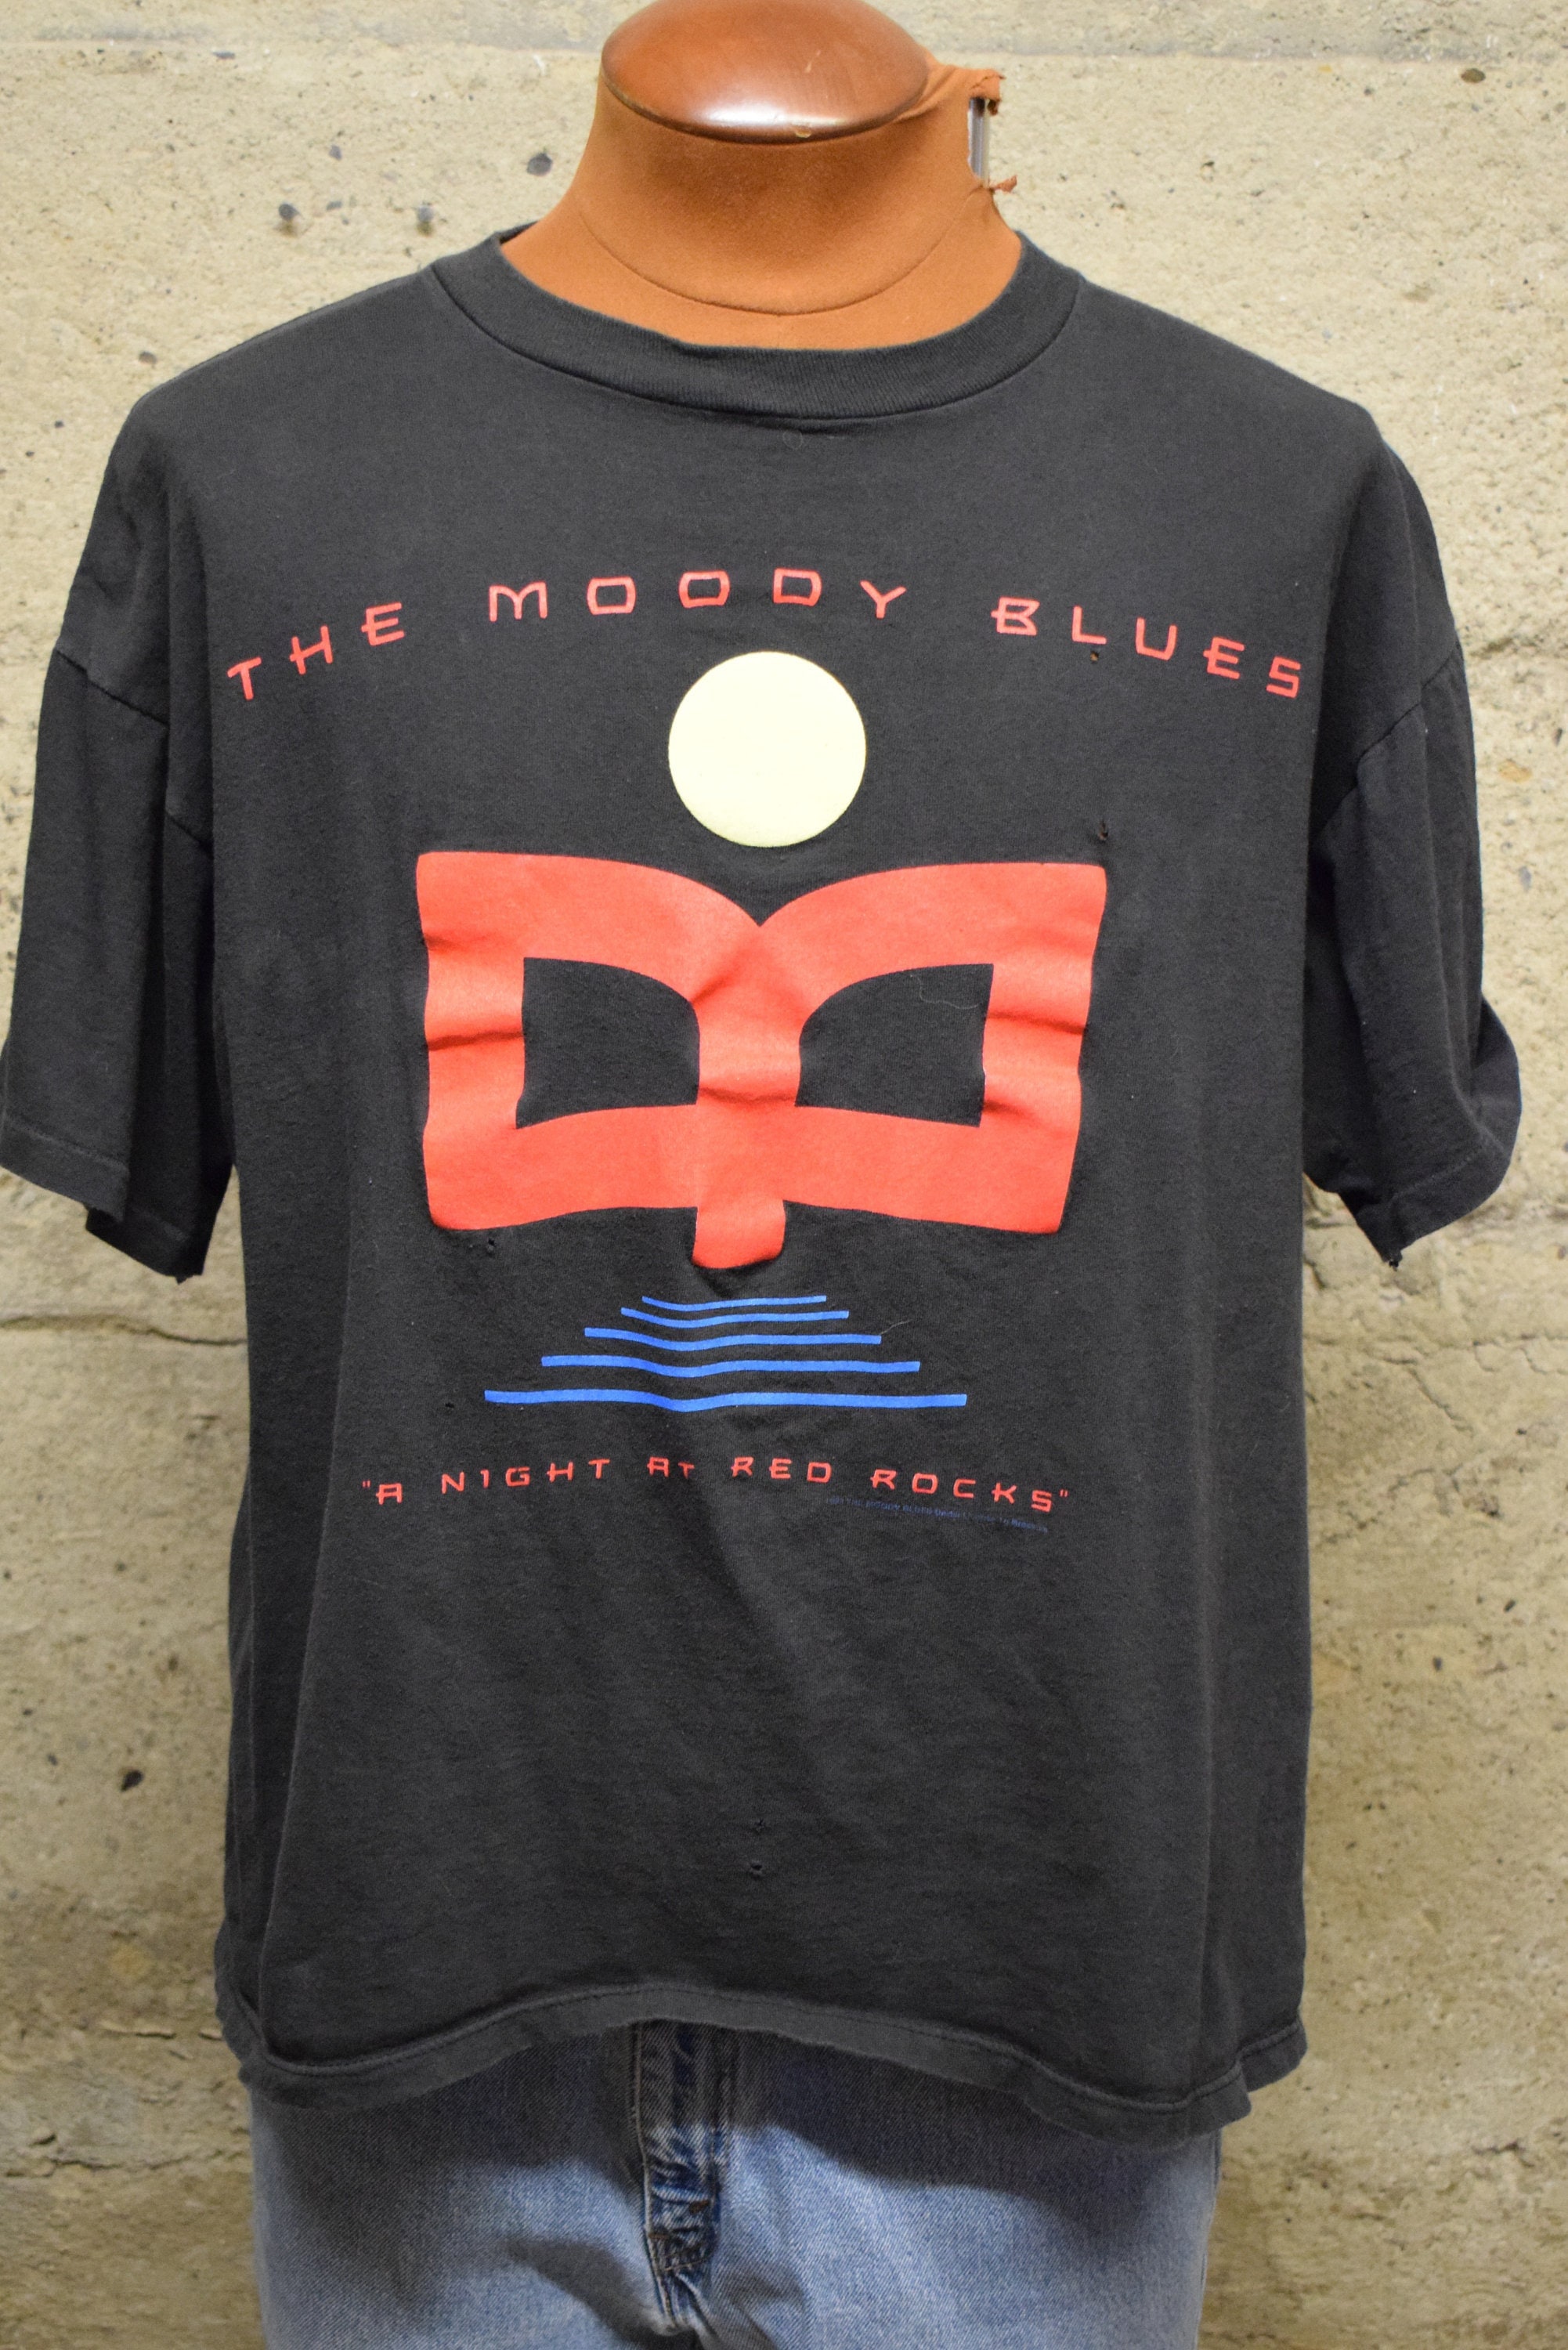 Vintage 1993 Moody Blues A Night at Red Rocks T-shirt 90's - Etsy